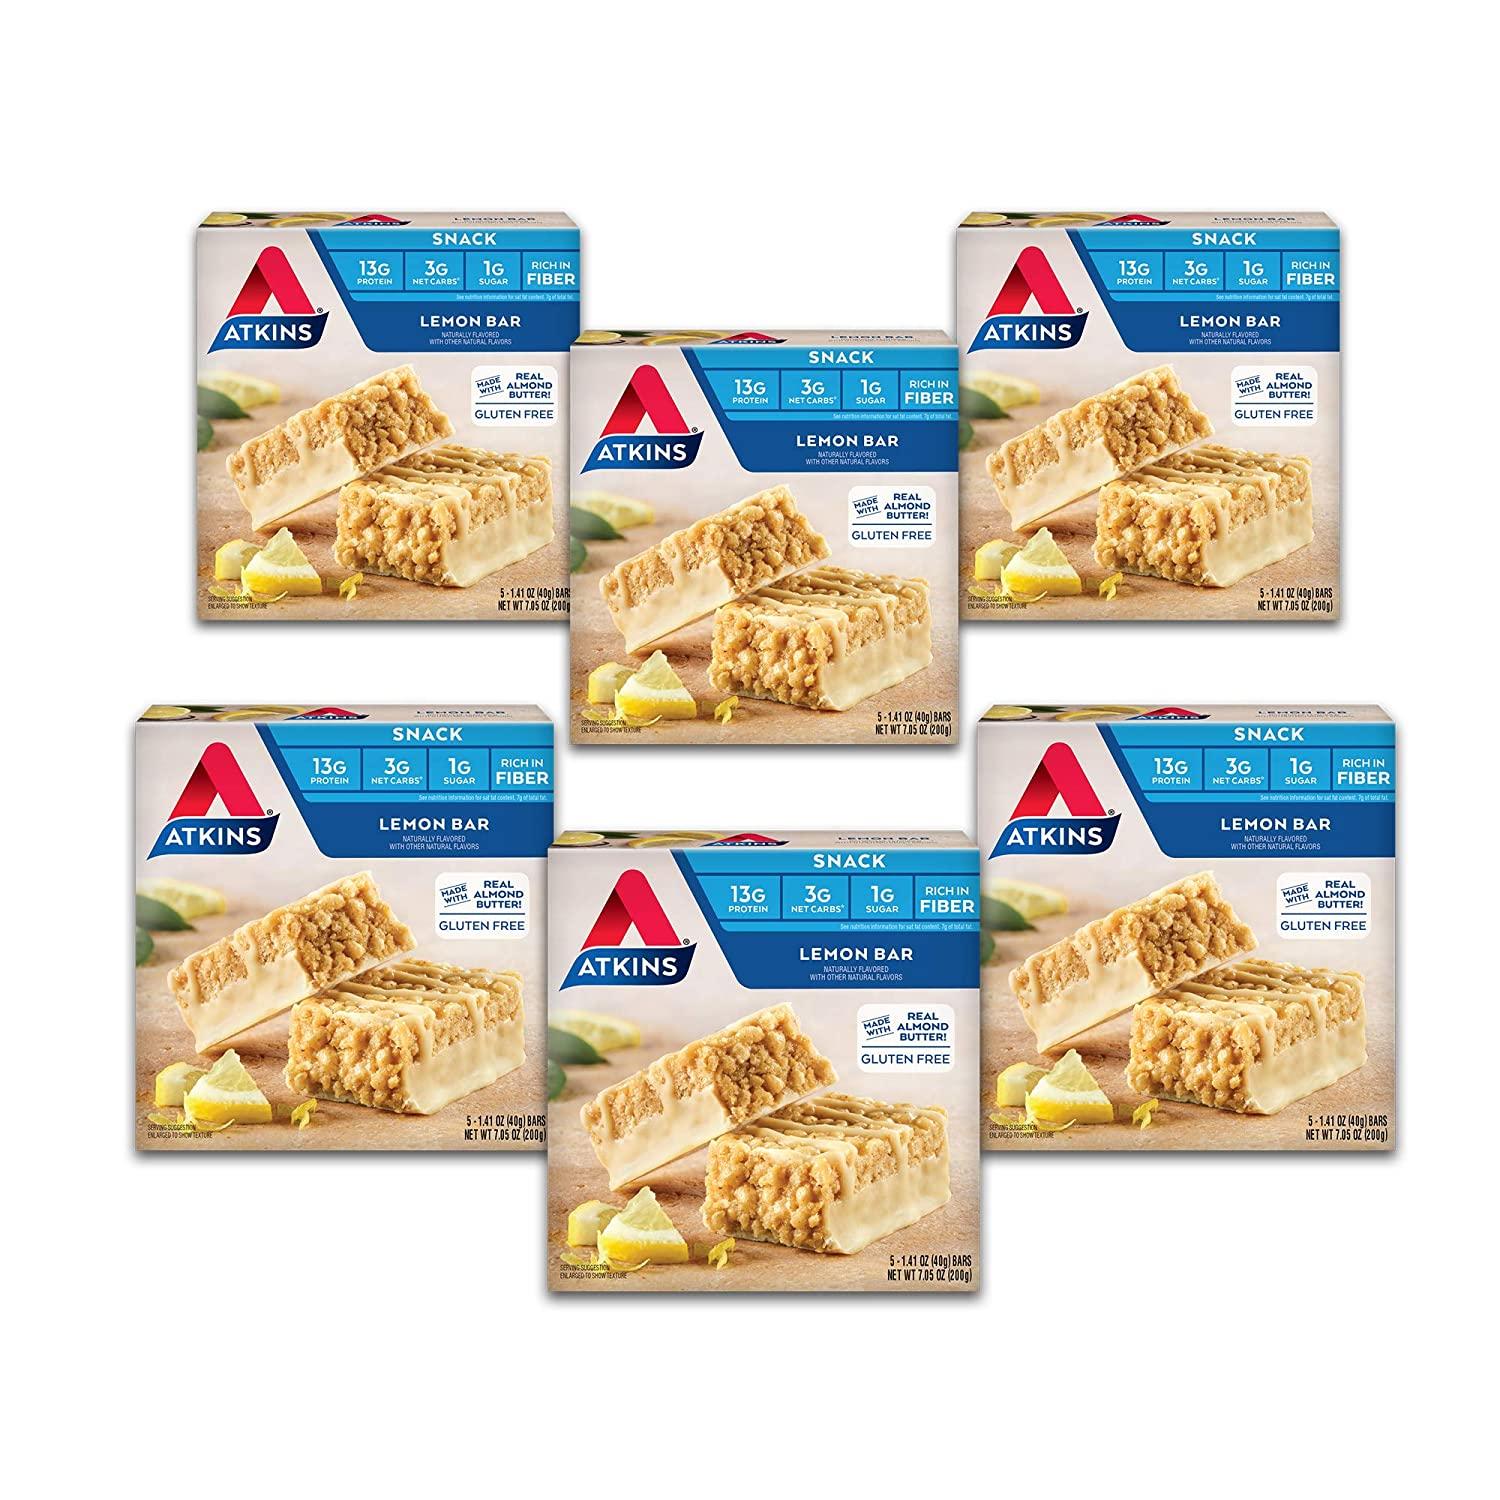 30 Atkins Gluten Free Snack Bar for $24.09 Shipped